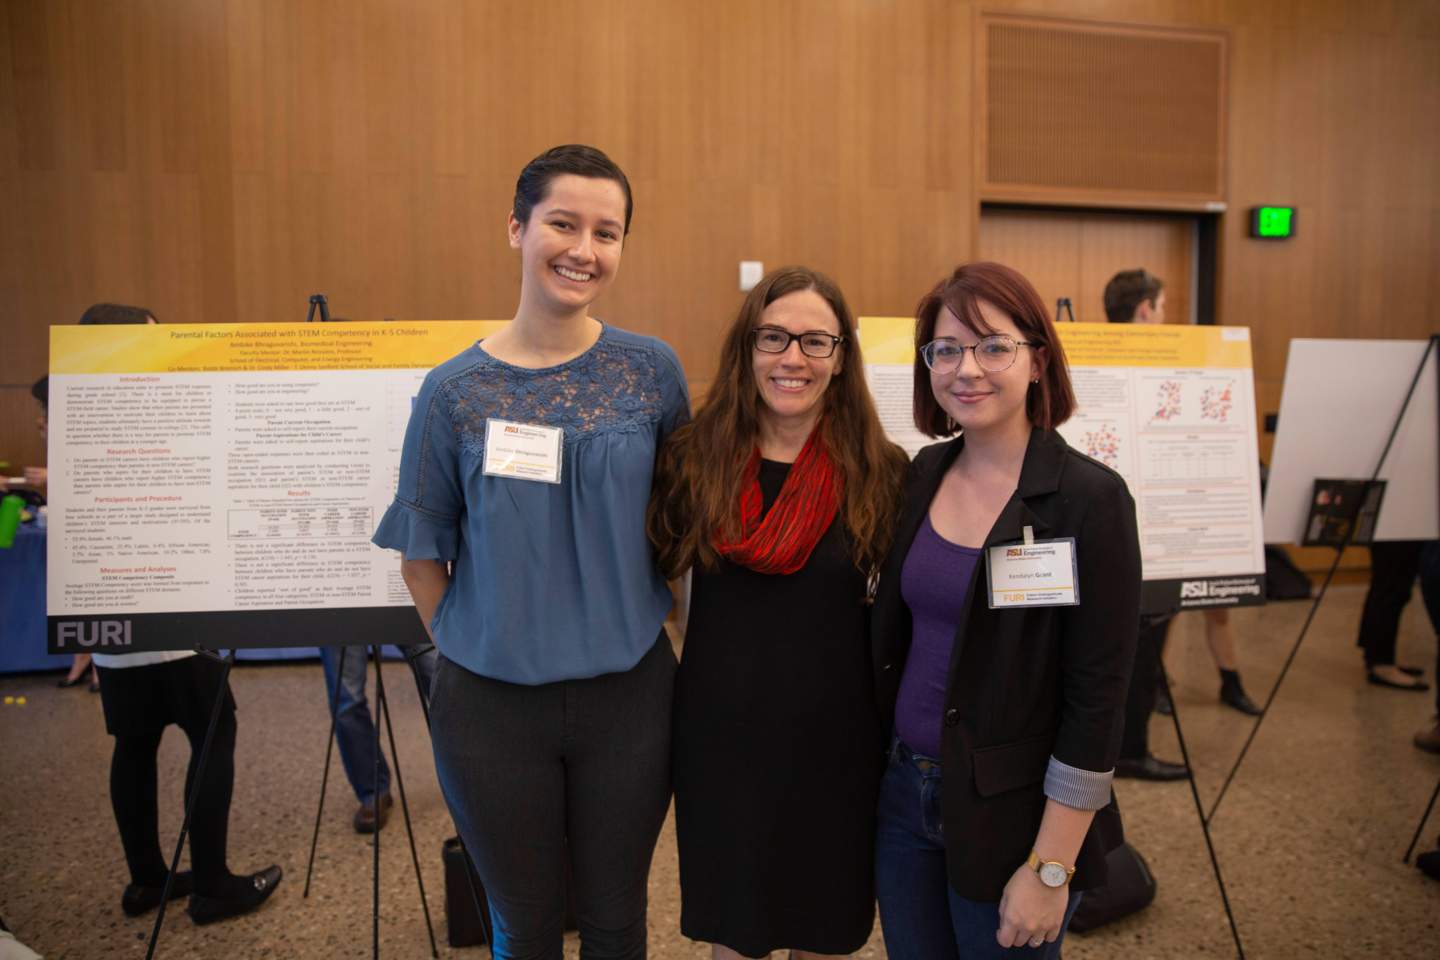 Dr. Miller proudly supporting ASU undergraduate students, Ambike Bhraguvanshi and Kendalyn Grant, who are presenting at the Fulton Undergraduate Research Symposium